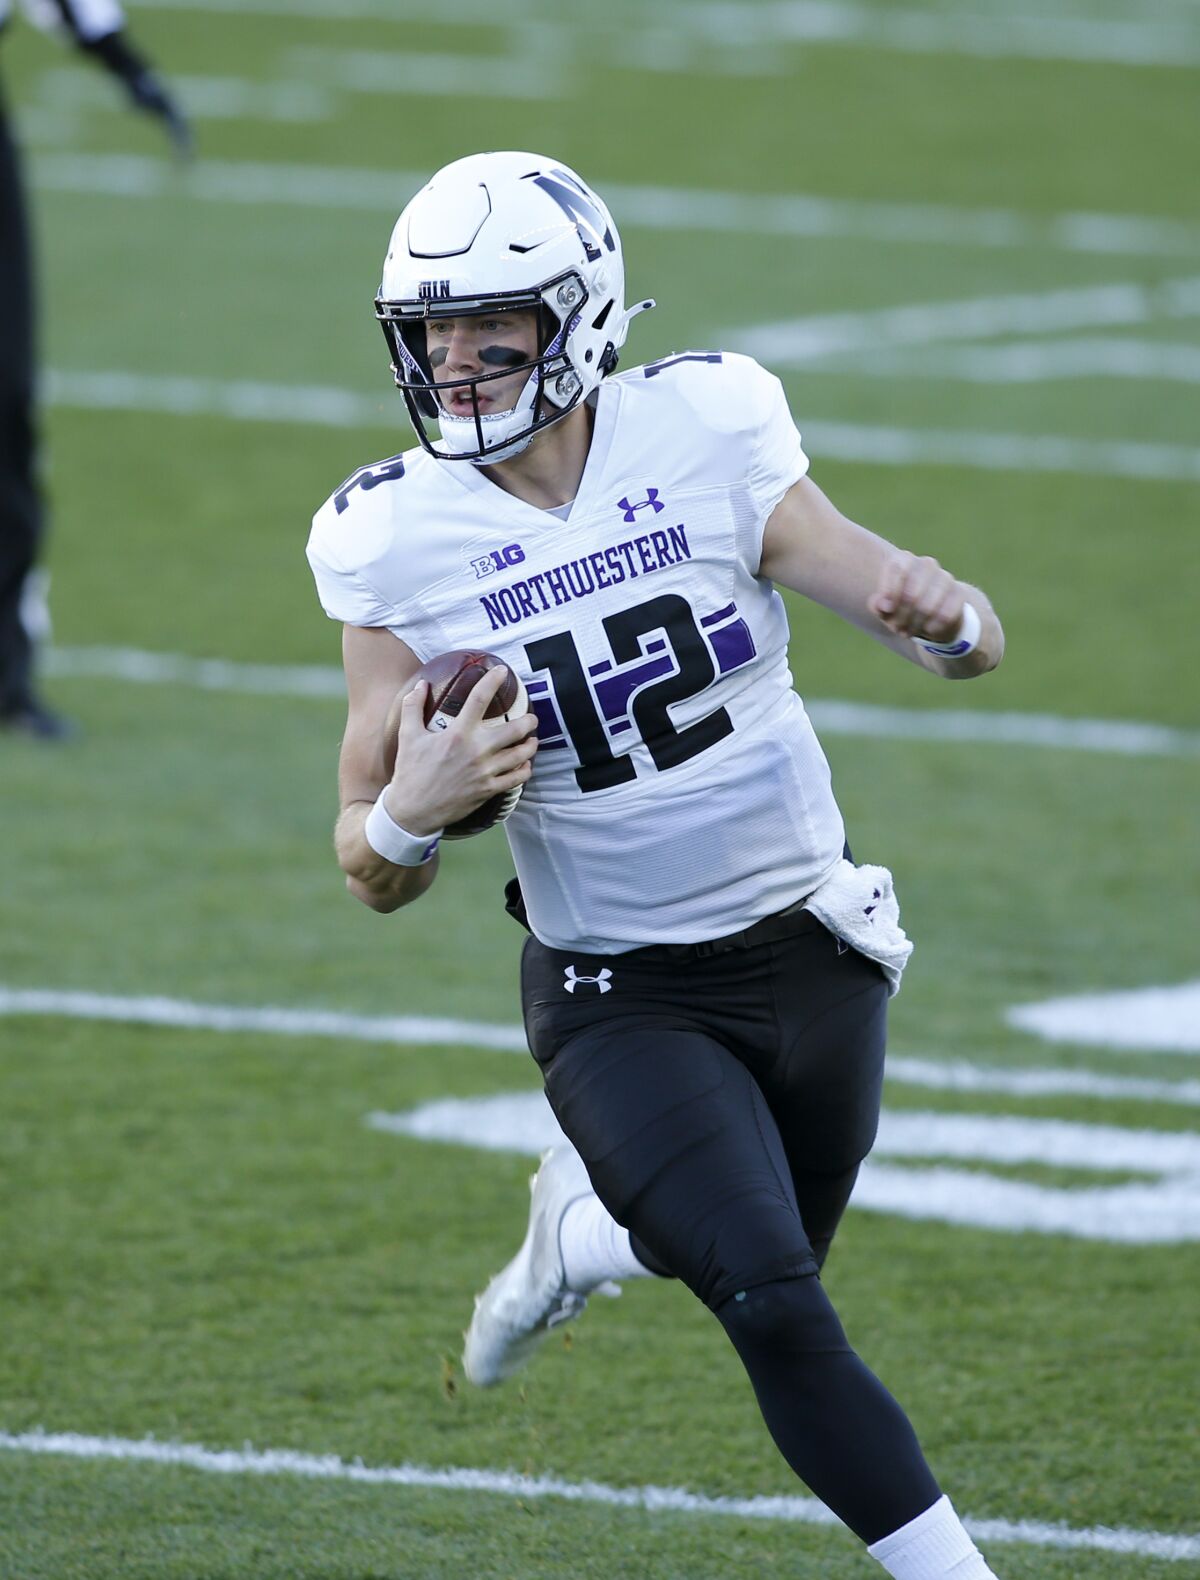 Northwestern quarterback Peyton Ramsey runs on a keeper against Michigan State during the first half of an NCAA college football game, Saturday, Nov. 28, 2020, in East Lansing, Mich. (AP Photo/Al Goldis)